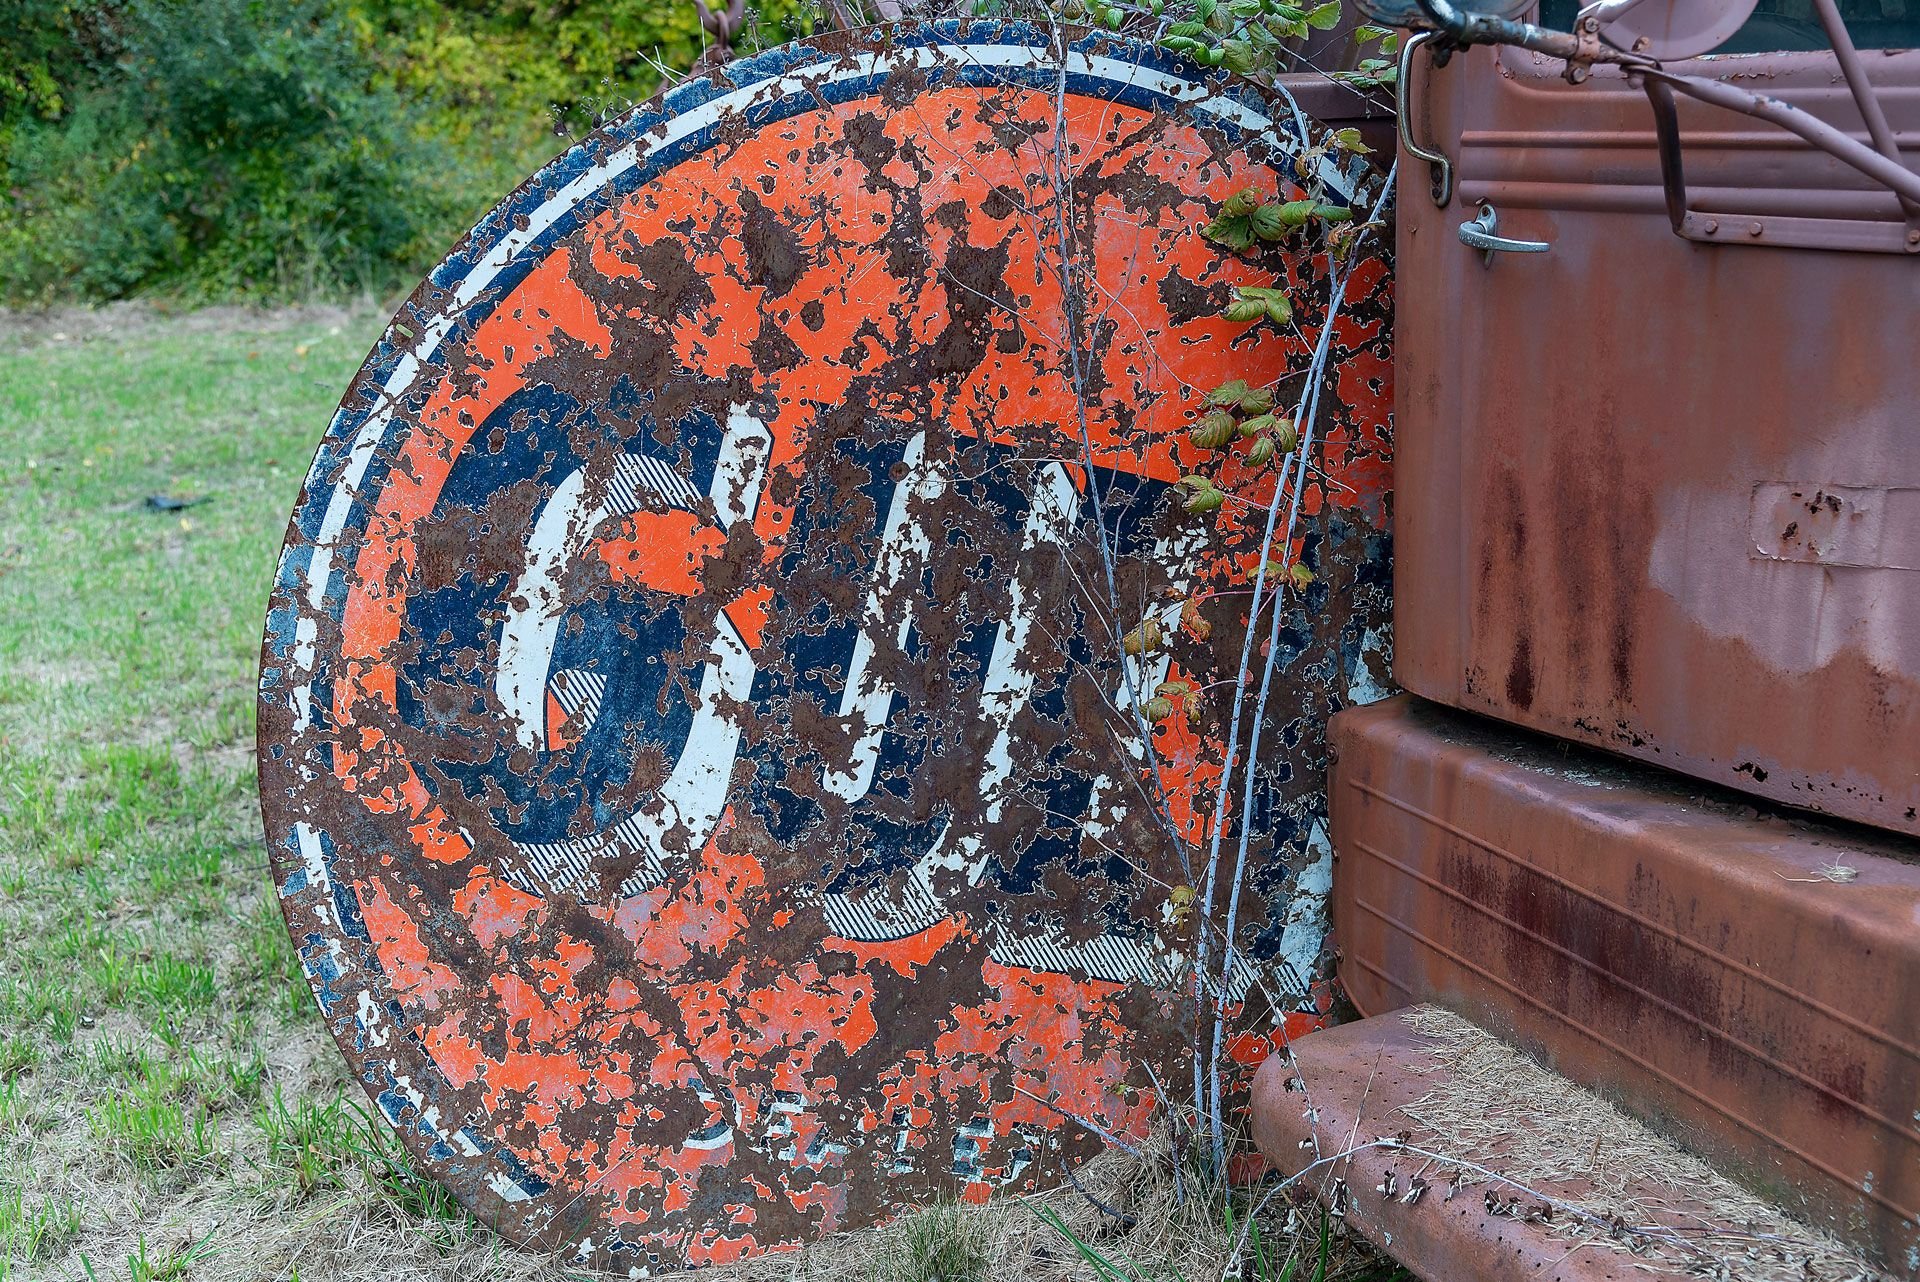 For Sale Very Worn, Large Gulf Oil Sign